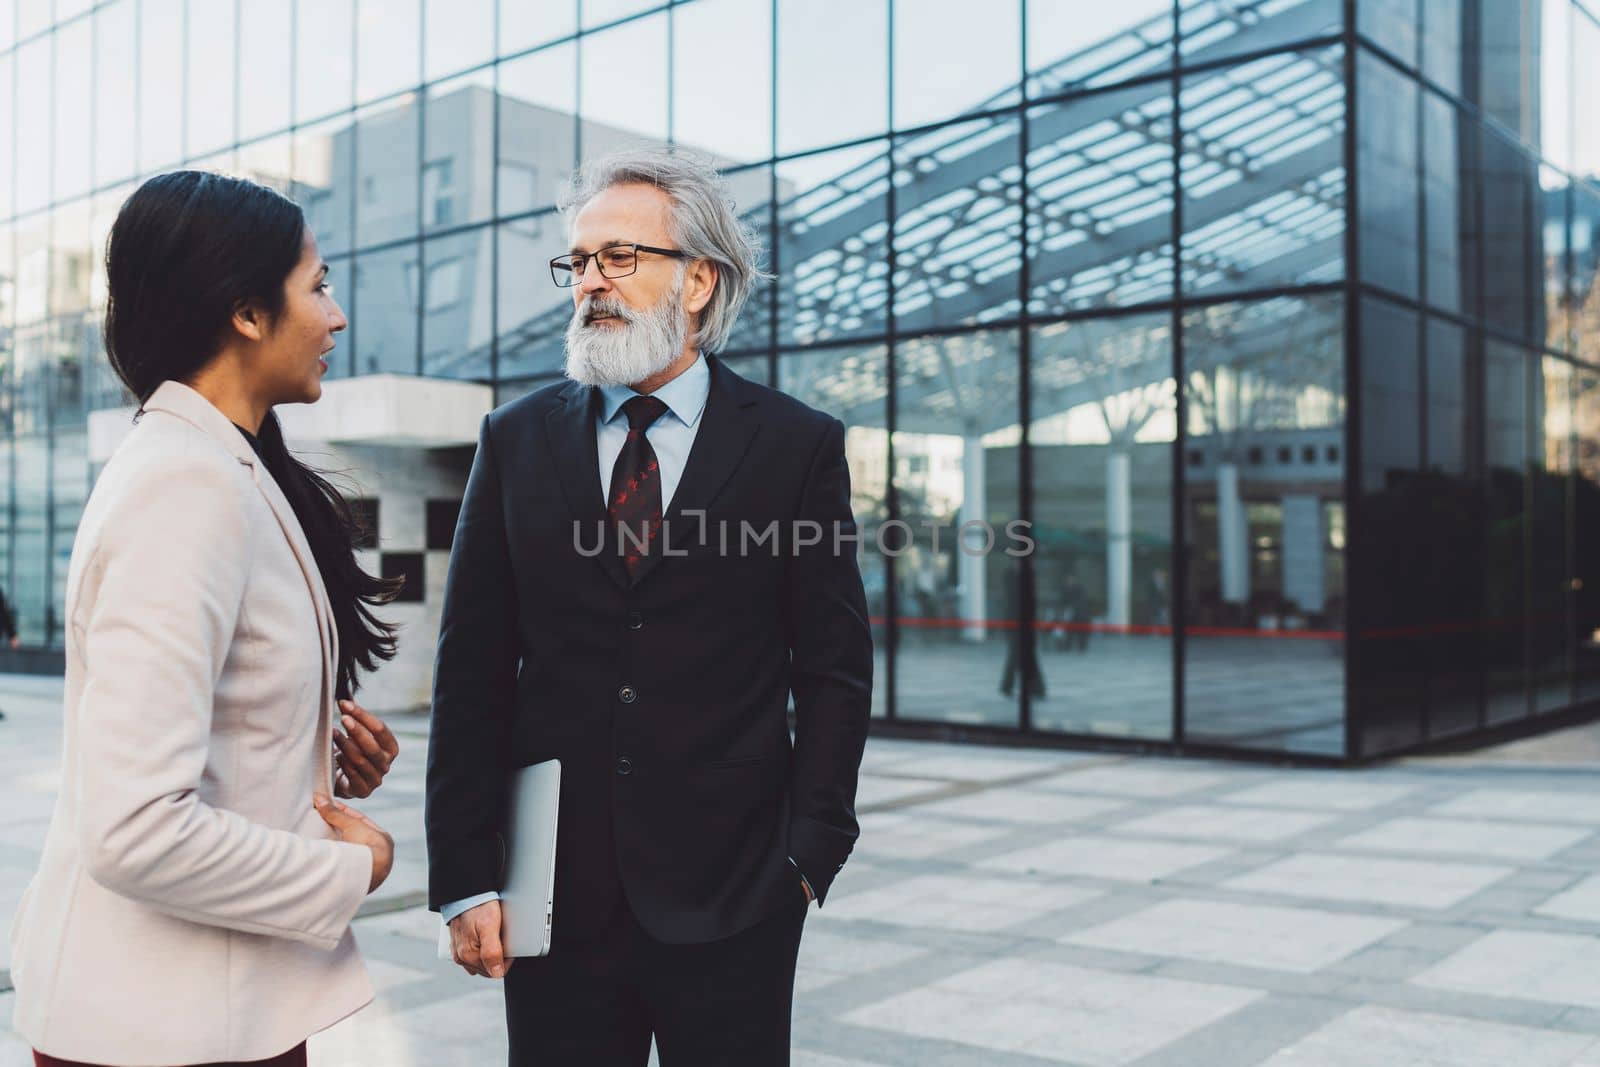 Business man and business woman standing outside talking on a sunny day, office building in the background.